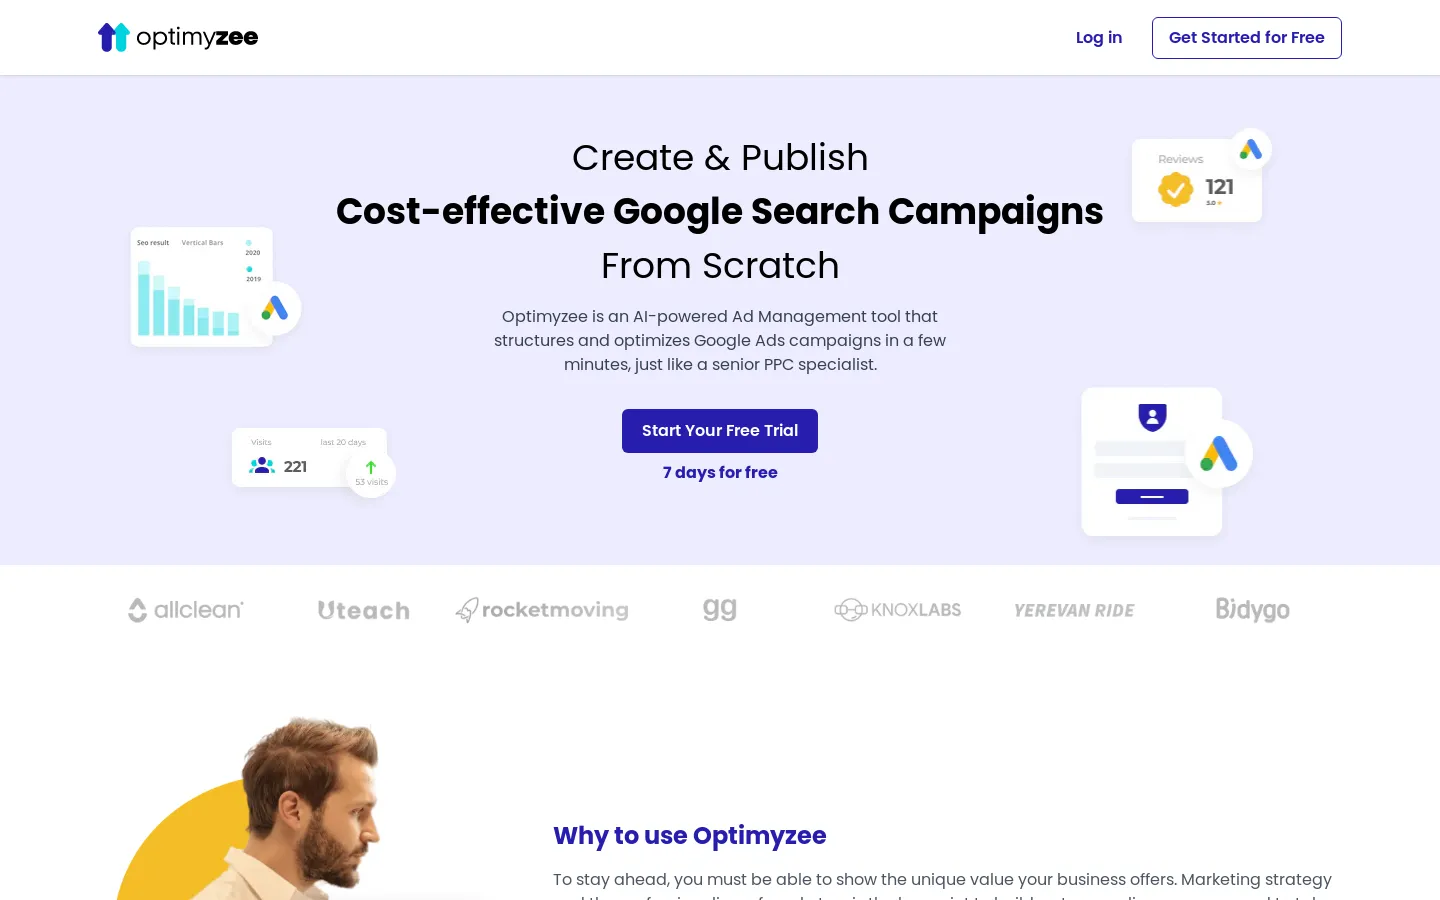 Ad Management tool for Google Ads campaigns - Optimyzee